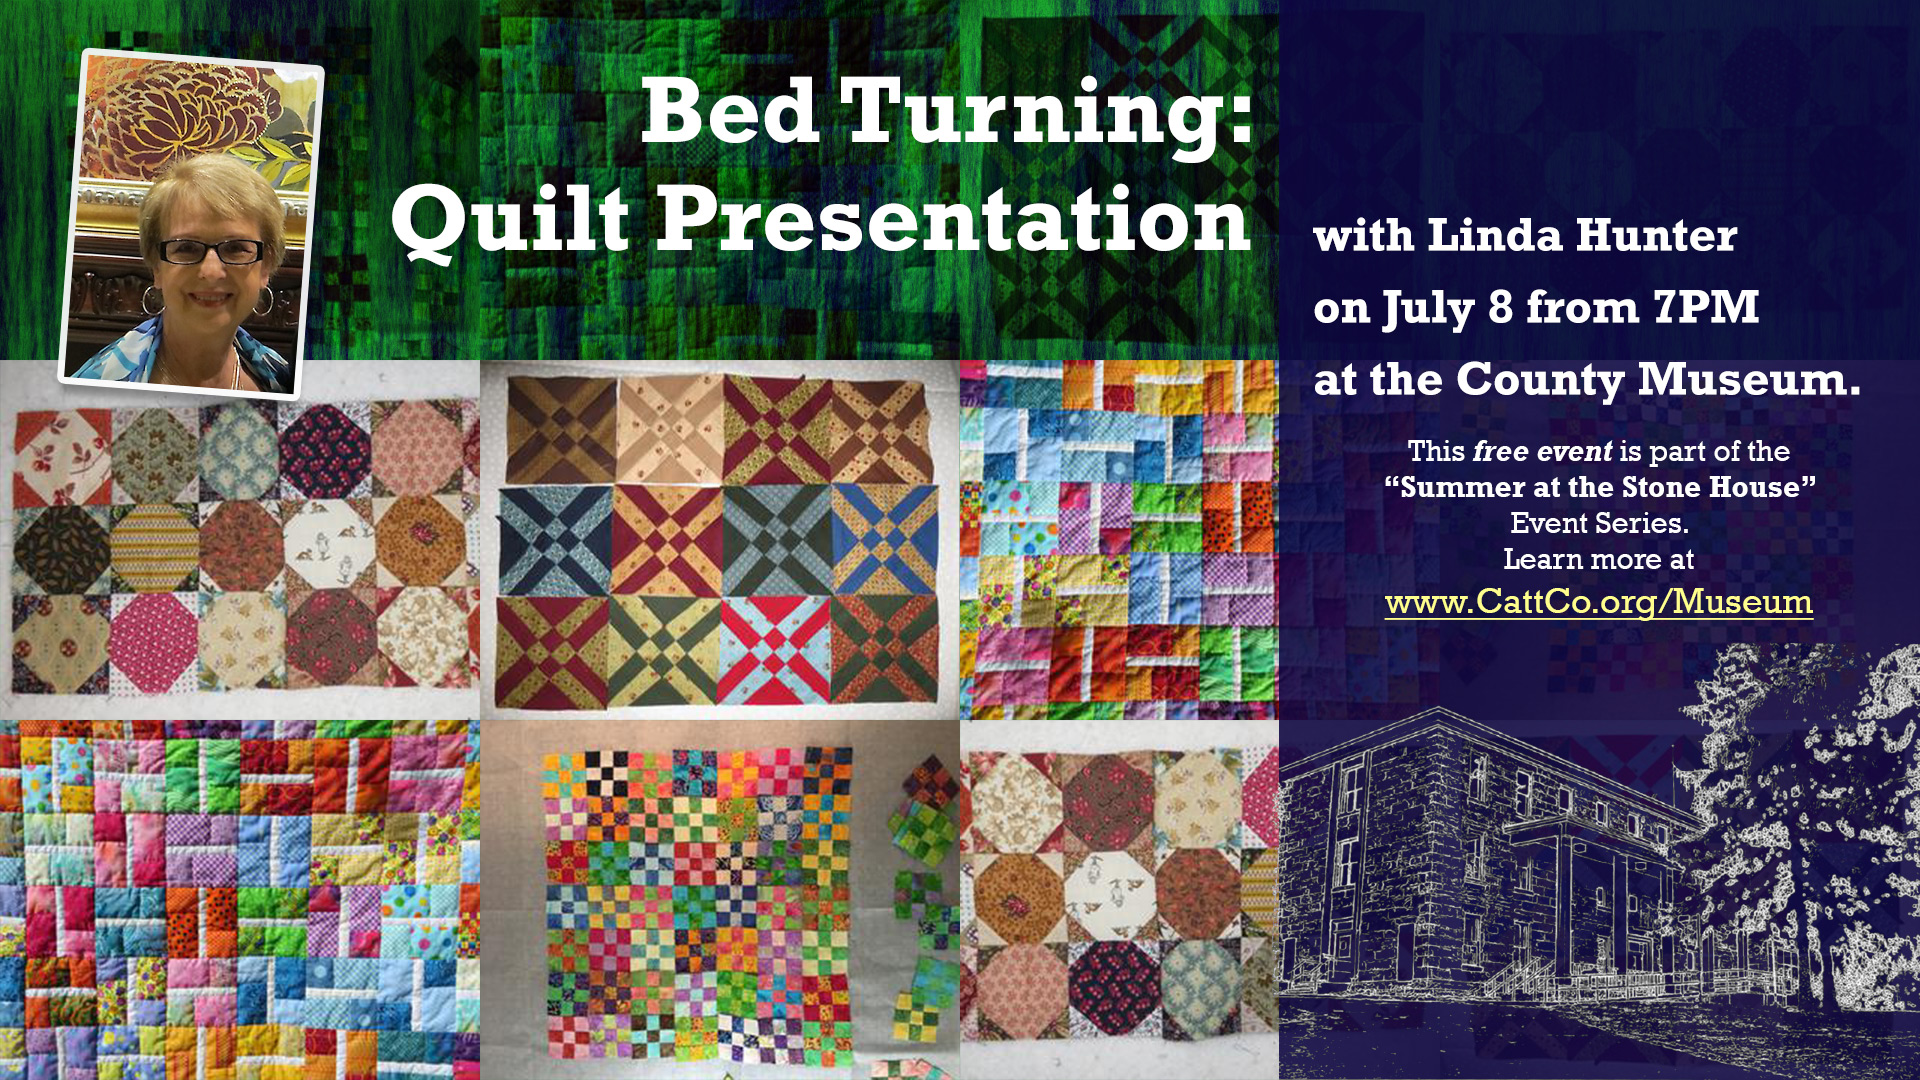 Bed Turning (Quilt Presentation) with Linda Hunter on July 8, 2021at the County Museum